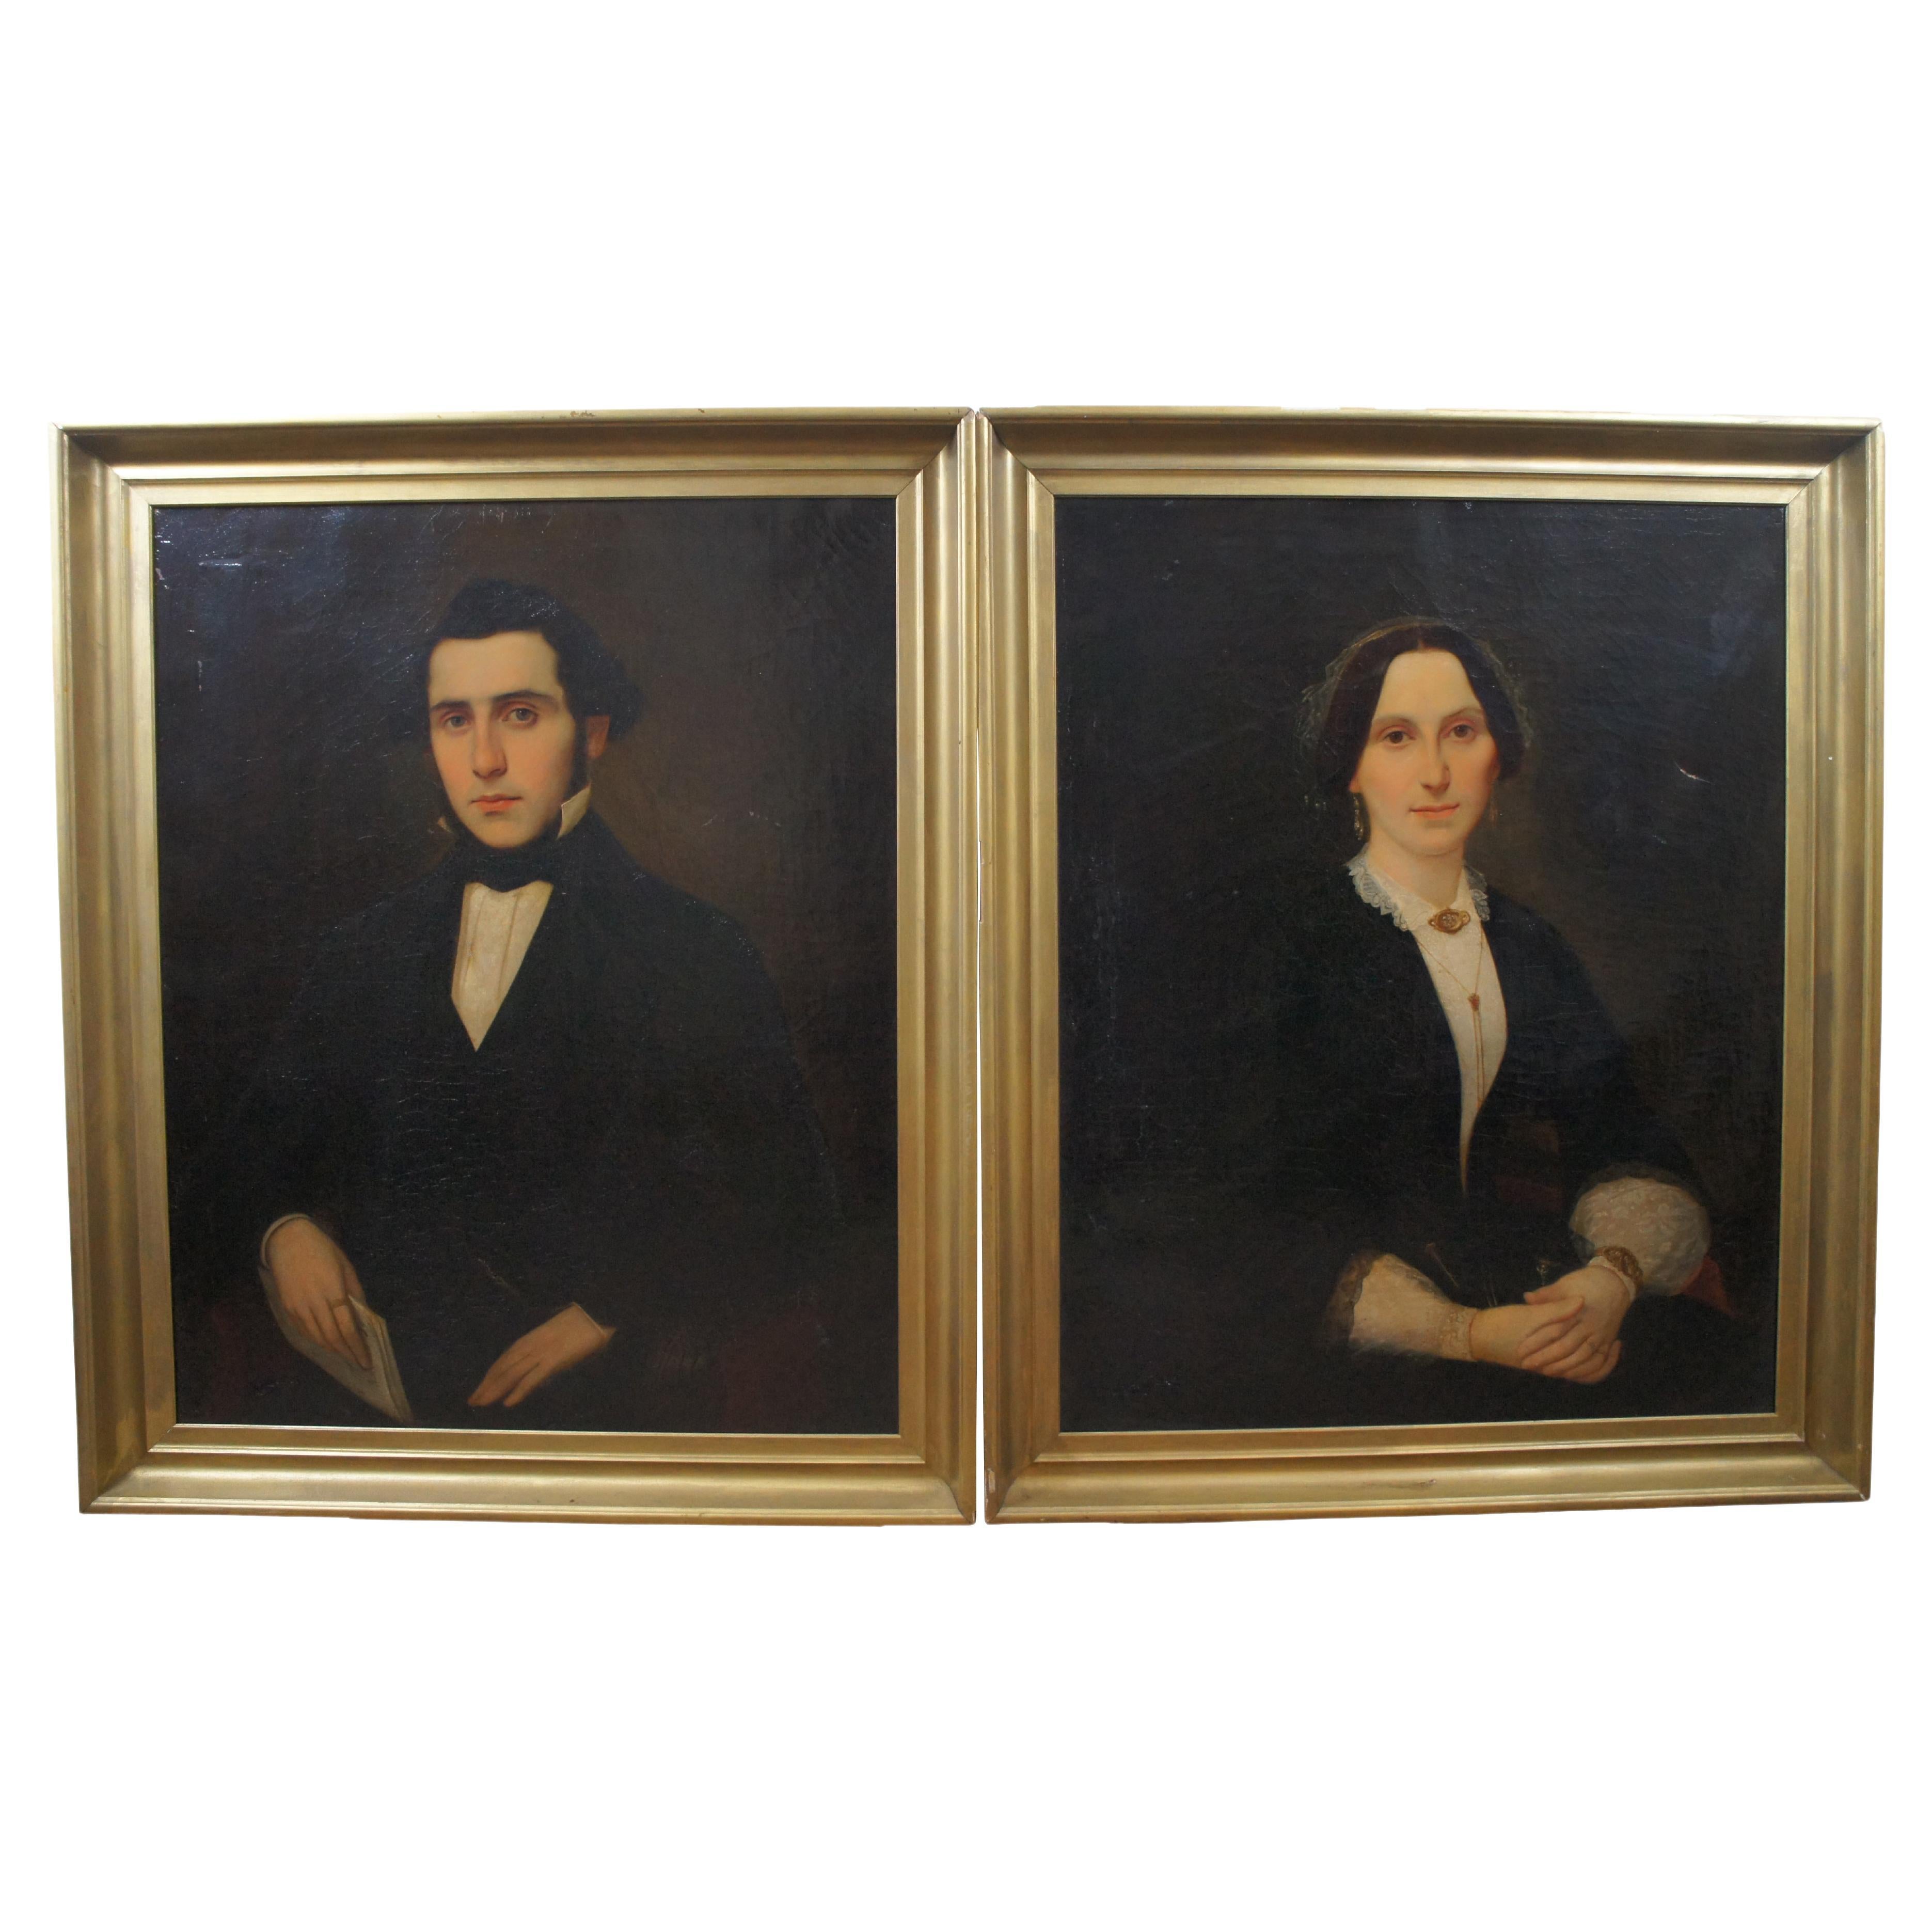 2 Antique 19th Century Husband & Wife Portrait Oil Paintings on Canvas Pair 41"